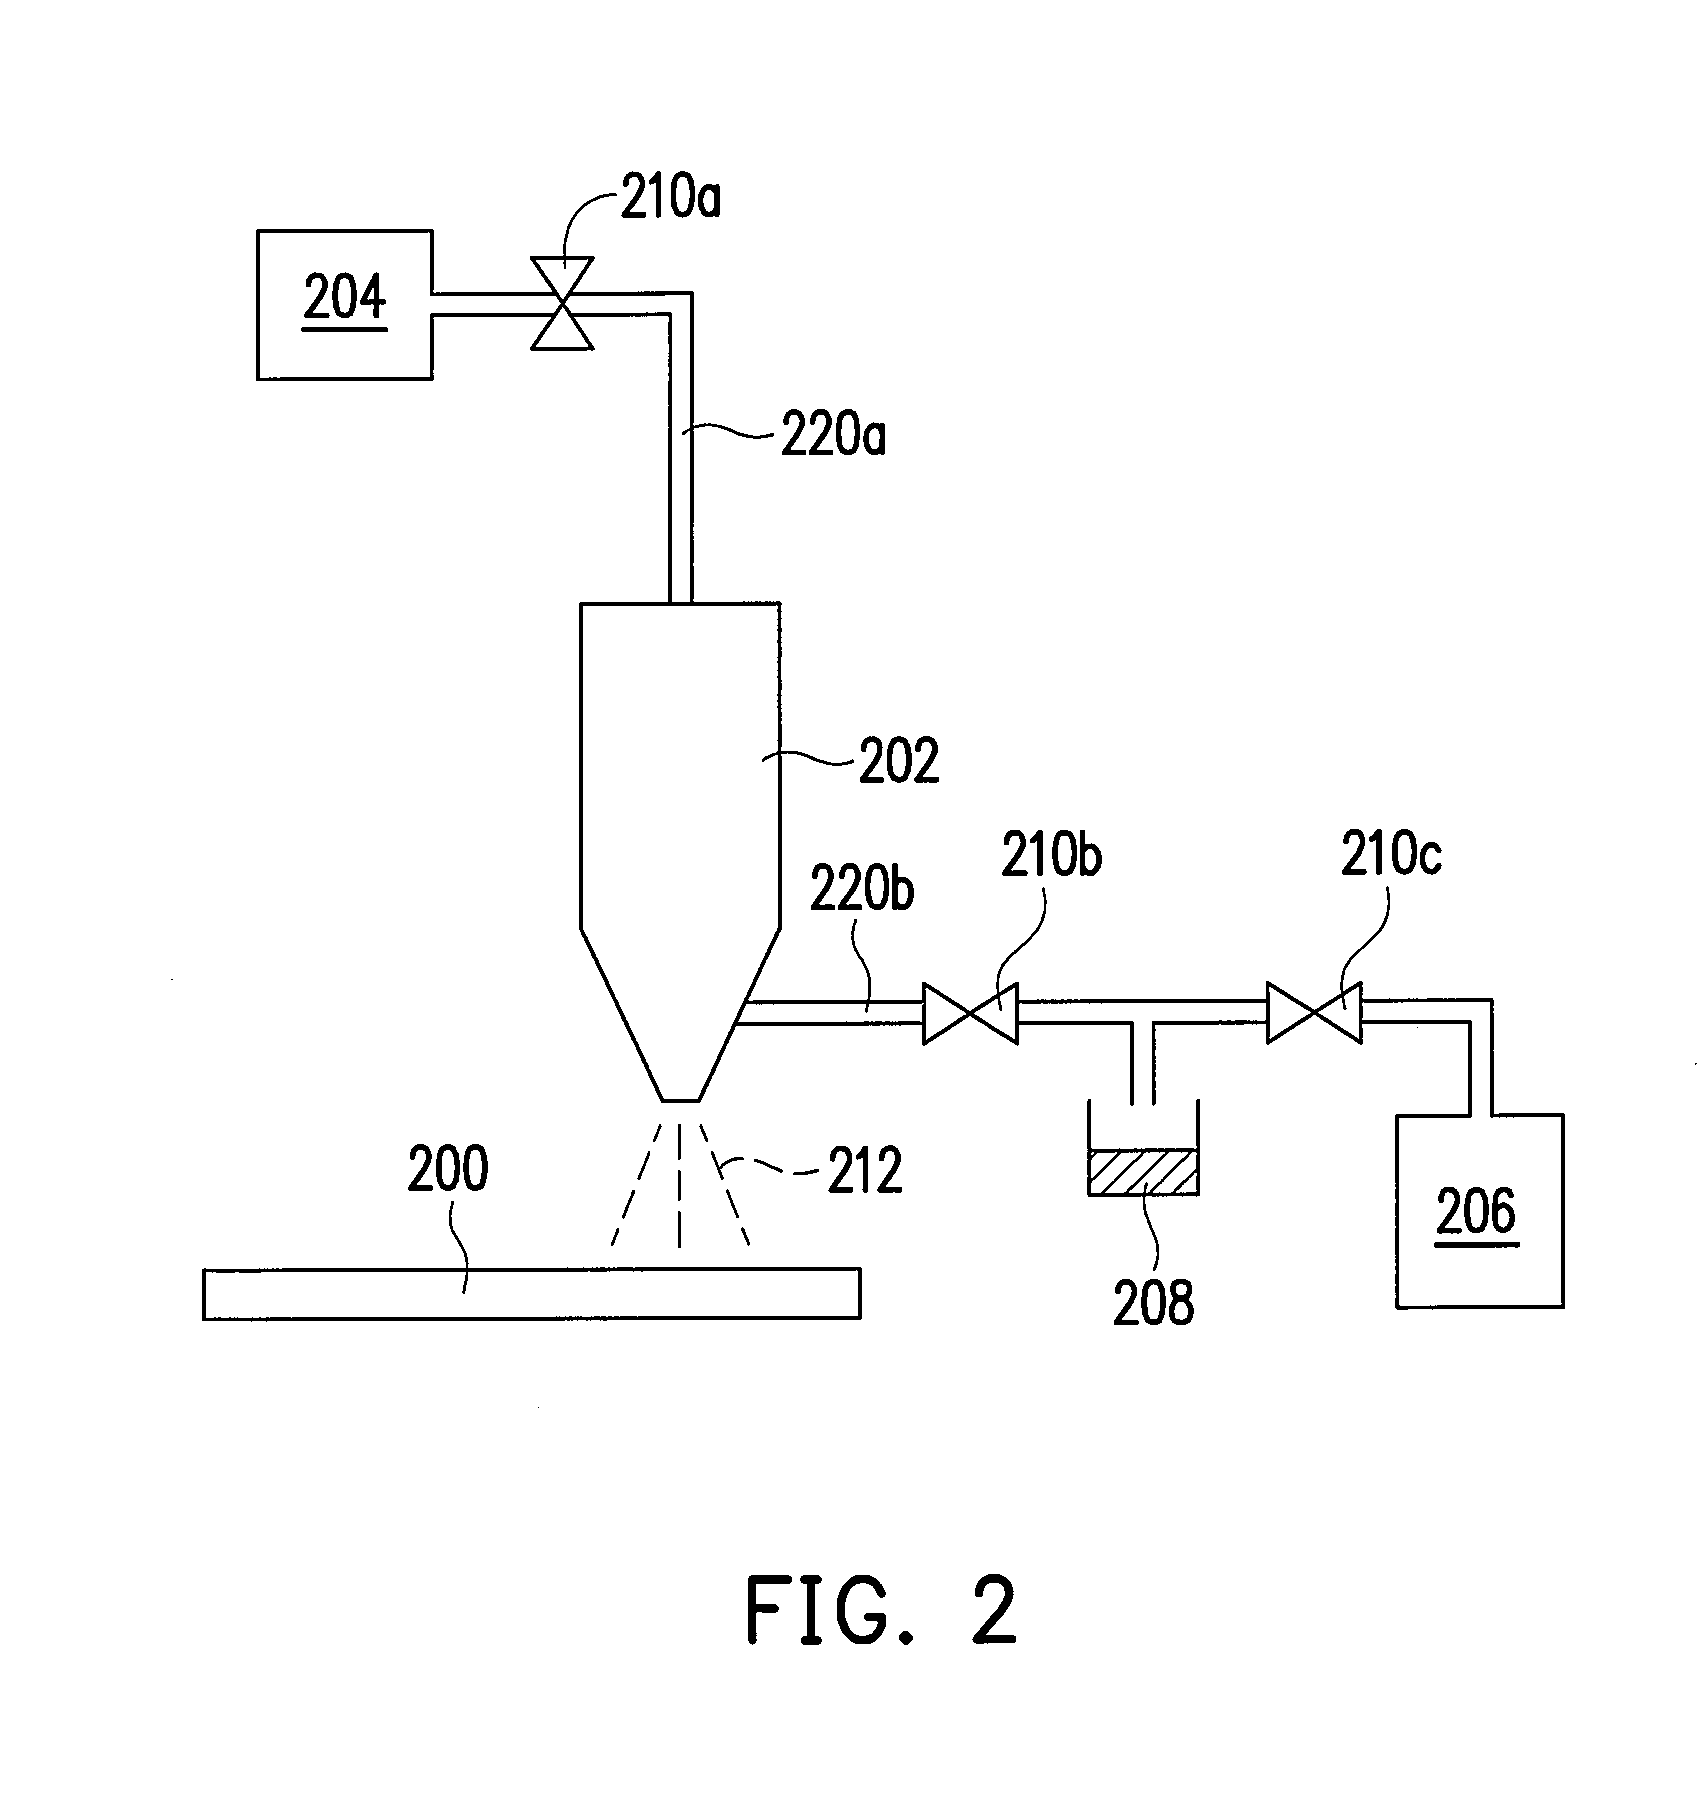 Method of improving surface flame resistnace of substrate